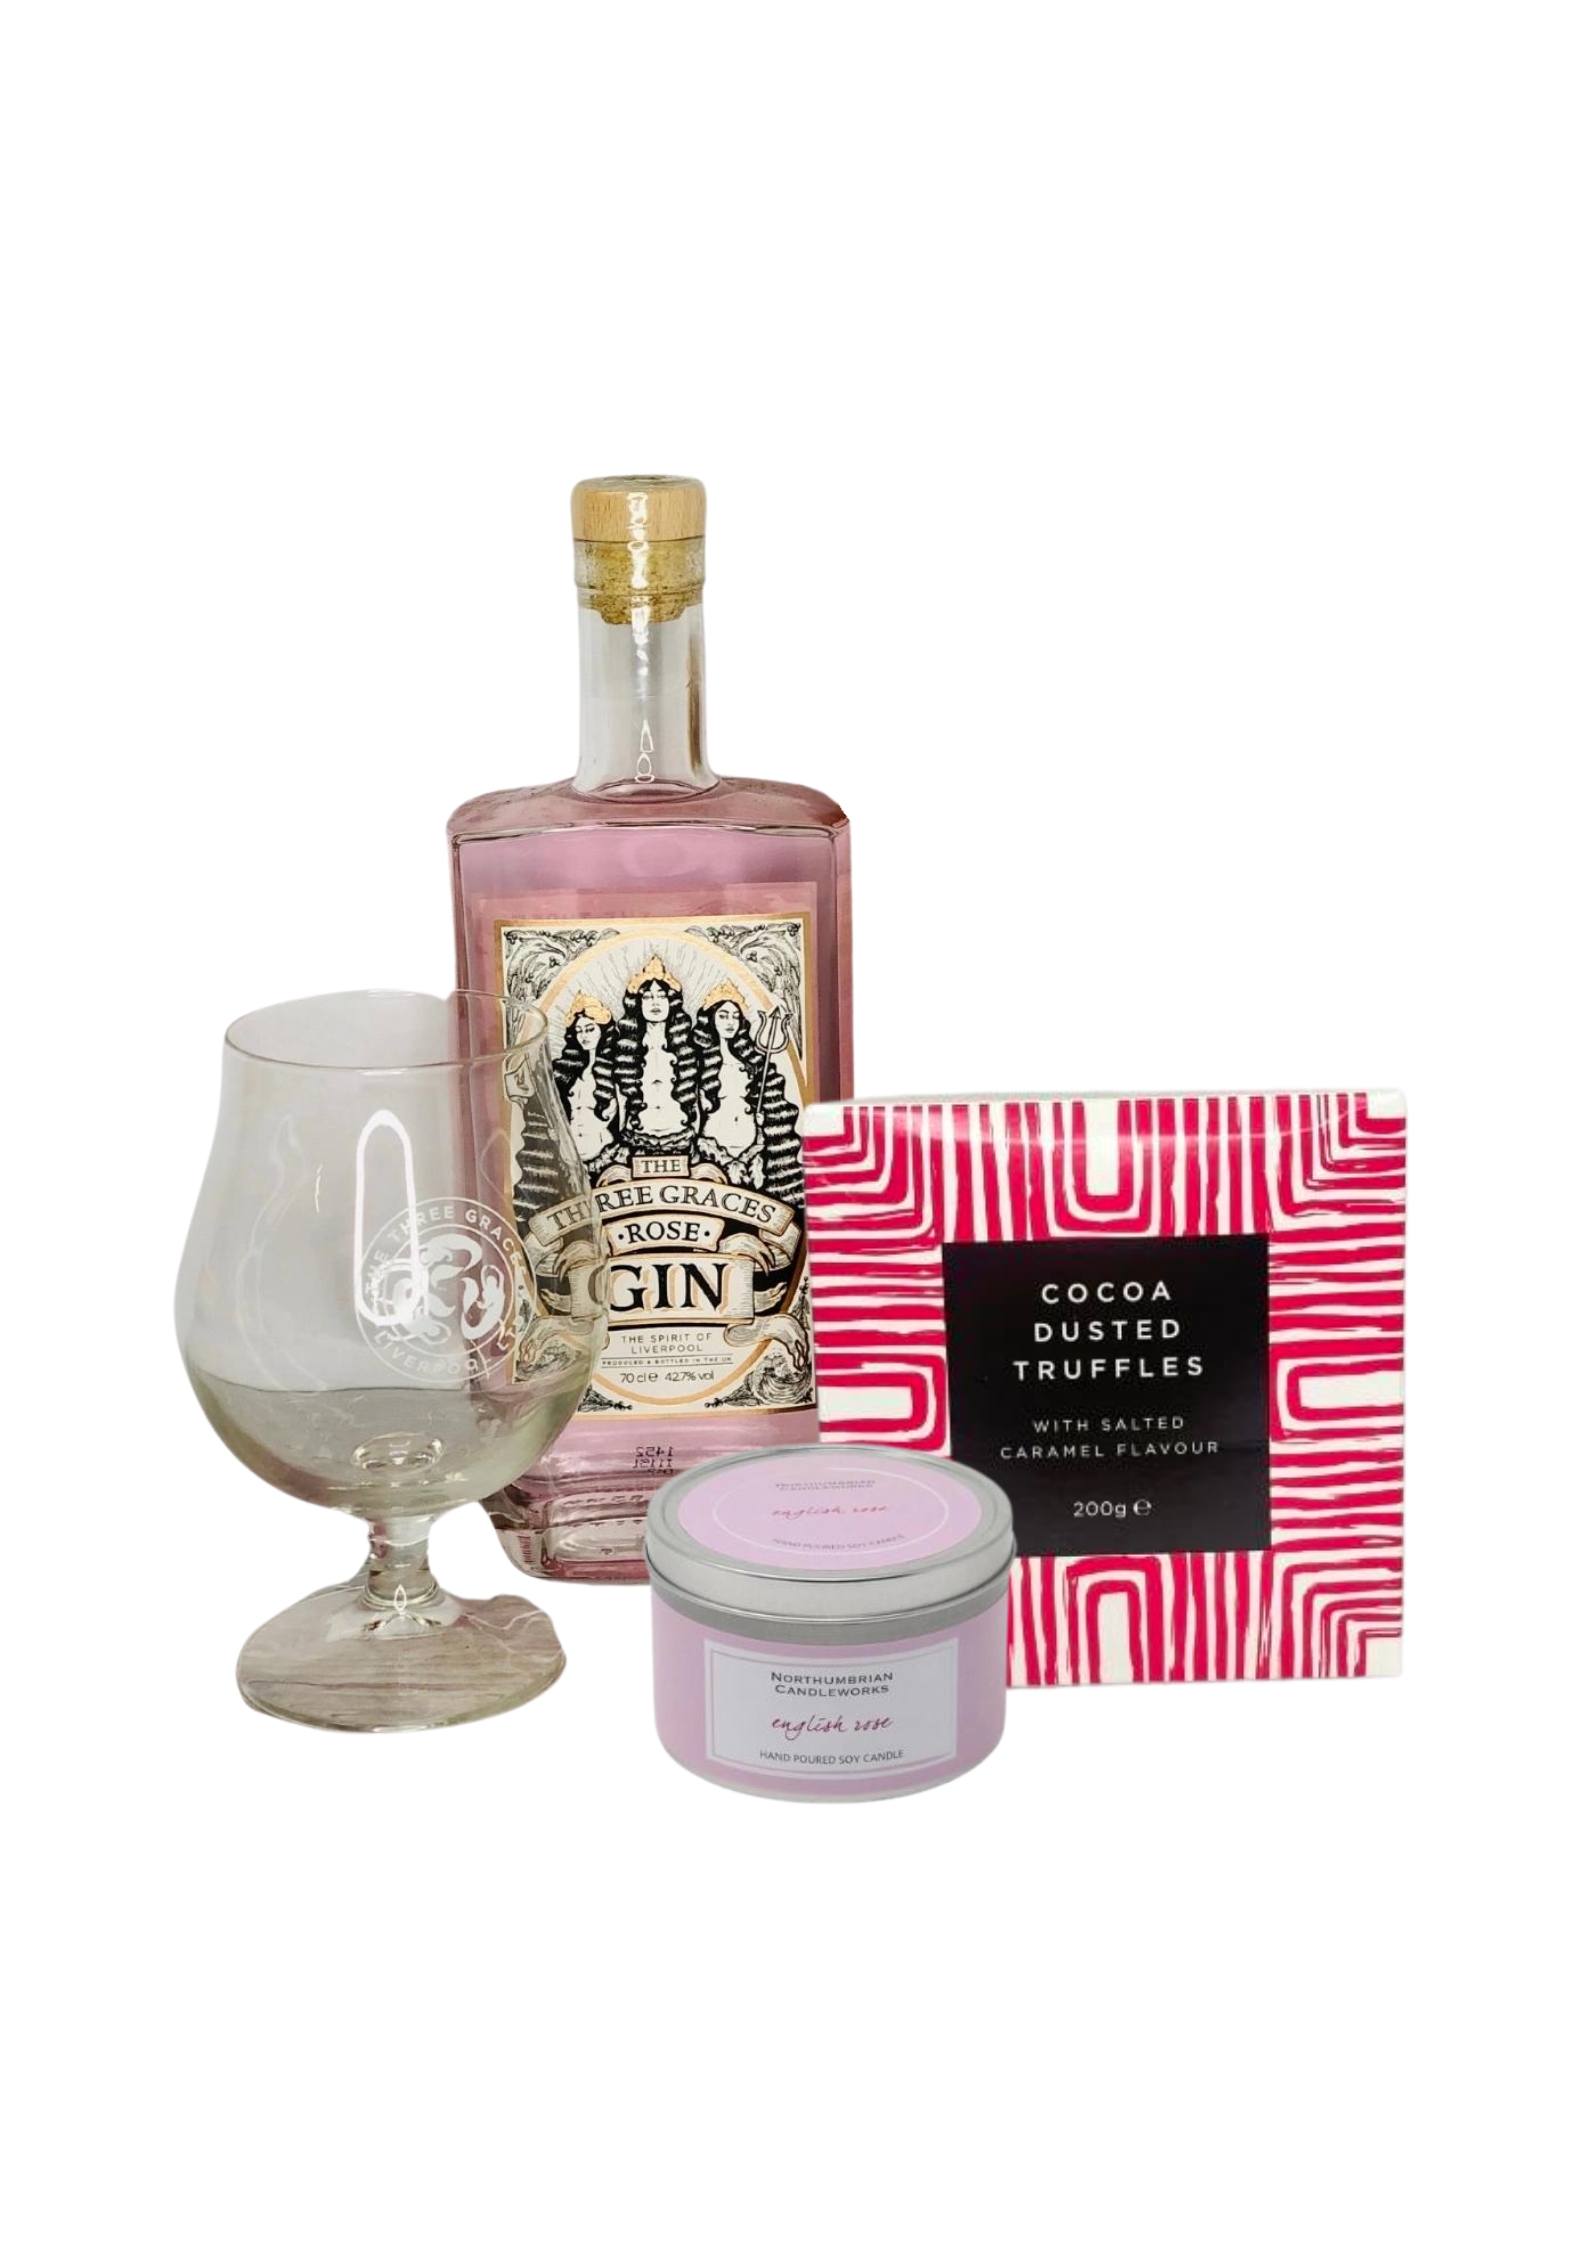 <h2>Rose Gin Gift Set | Gin Lover Giftset</h2>
<br>
<ul>
<li>70cl bottle of Rose Gin made in Liverpool - 12.7%</li>
<li>Locally made The Three Graces Rose Gin</li>
<li>The Three Graces matching Glass</li>
<li>115g Maison Fougere Belgian Chocolates</li>
<li>This product contains alcohol and as such should only be bought for someone over the age of 18</li>
<li>For delivery area coverage see below</li>
</ul>
<br>
<h2>Gift Delivery Coverage</h2>
<p>Our shop delivers flowers and gifts to the following Liverpool postcodes L1 L2 L3 L4 L5 L6 L7 L8 L11 L12 L13 L14 L15 L16 L17 L18 L19 L24 L25 L26 L27 L36 L70 If your order is for an area outside of these we can organise delivery for you through our network of florists. We will ask them to make as close as possible to the image but because of the difference in stock and sundry items, it may not be exact.</p>
<br>
<h2>Alcohol Gifts</h2>
<p>As a licensed florist, we are able to supply alcoholic drinks either as a gift on their own or with flowers. We have carefully selected a range that we know you will love either as a gift in itself or to provide that extra bit of celebratory luxury to a floral gift.</p>
<p>This locally-made bottle of The Three Graces Rose Gin made in Liverpool is the perfect choice for a Gin lover!</p>
<p>This bottle of Three Graces Rose Gin is made here in Liverpool and comes with a matching Three Graces Gin Glass together with a box of 115g Maison Fougere Belgian Chocolates in a stylish gift box.</p>
<p>This smooth gin evokes the splendour of botanical beauty with the lasting flavours of rose and citrus. Our unique blend of 11 botanicals also includes classic juniper Angelica Root and Cassia Bark to give you a spirit perfectly served over ice.</p>
<p>Have this giftset delivered to someone special to celebrate as an alternative to having flowers delivered, or have it delivered with your flowers to really celebrate!</p>
<p>Rose Gin is brewed in Liverpool by The Three Graces.</p>
<br>
<h2>Online Gift Ordering | Online Gift Delivery</h2>
<p>Through this website you can order 24 hours, Booker Gifts and Gifts Liverpool have put together this carefully selected range of Flowers, Gifts and Finishing Touches to make Gift ordering as easy as possible. This means even if you do not live in Liverpool we make it easy for you to see what you are getting when buying for delivery in Liverpool.</p>
<br>
<h2>Liverpool Flower and Gift Delivery</h2>
<p>We are open 7 days a week and offer advanced booking flower delivery, same-day flower delivery, Guaranteed AM Flower Delivery and also offer Sunday Flower Delivery.</p>
<p>Our florists Deliver in Liverpool and can provide flowers for you in Liverpool, Merseyside. And through our network of florists can organise flower deliveries for you nationwide.</p>
<br>
<h2>Beautiful Gifts Delivered | Best Florist in Liverpool</h2>
<p>Having been nominated the Best Florist in Liverpool by the independent Three Best Rated for the 5th year running you can feel secure with us</p>
<p>You can trust Booker Gifts and Gifts to deliver the very best for you.</p>
<br>
<h2>5 Star Google Review</h2>
<p><em>So Pleased with the product and service received. I am working away currently, so ordered online, and after my own misunderstanding with online payment, I contacted the florist directly to query. Gemma was very prompt and helpful, and my flowers were arranged easily. They arrived this morning and were as impactful as the pictures on the website, and the quality of the flowers and the arrangement were excellent. Great Work! David Welsh</em></p>
<br>